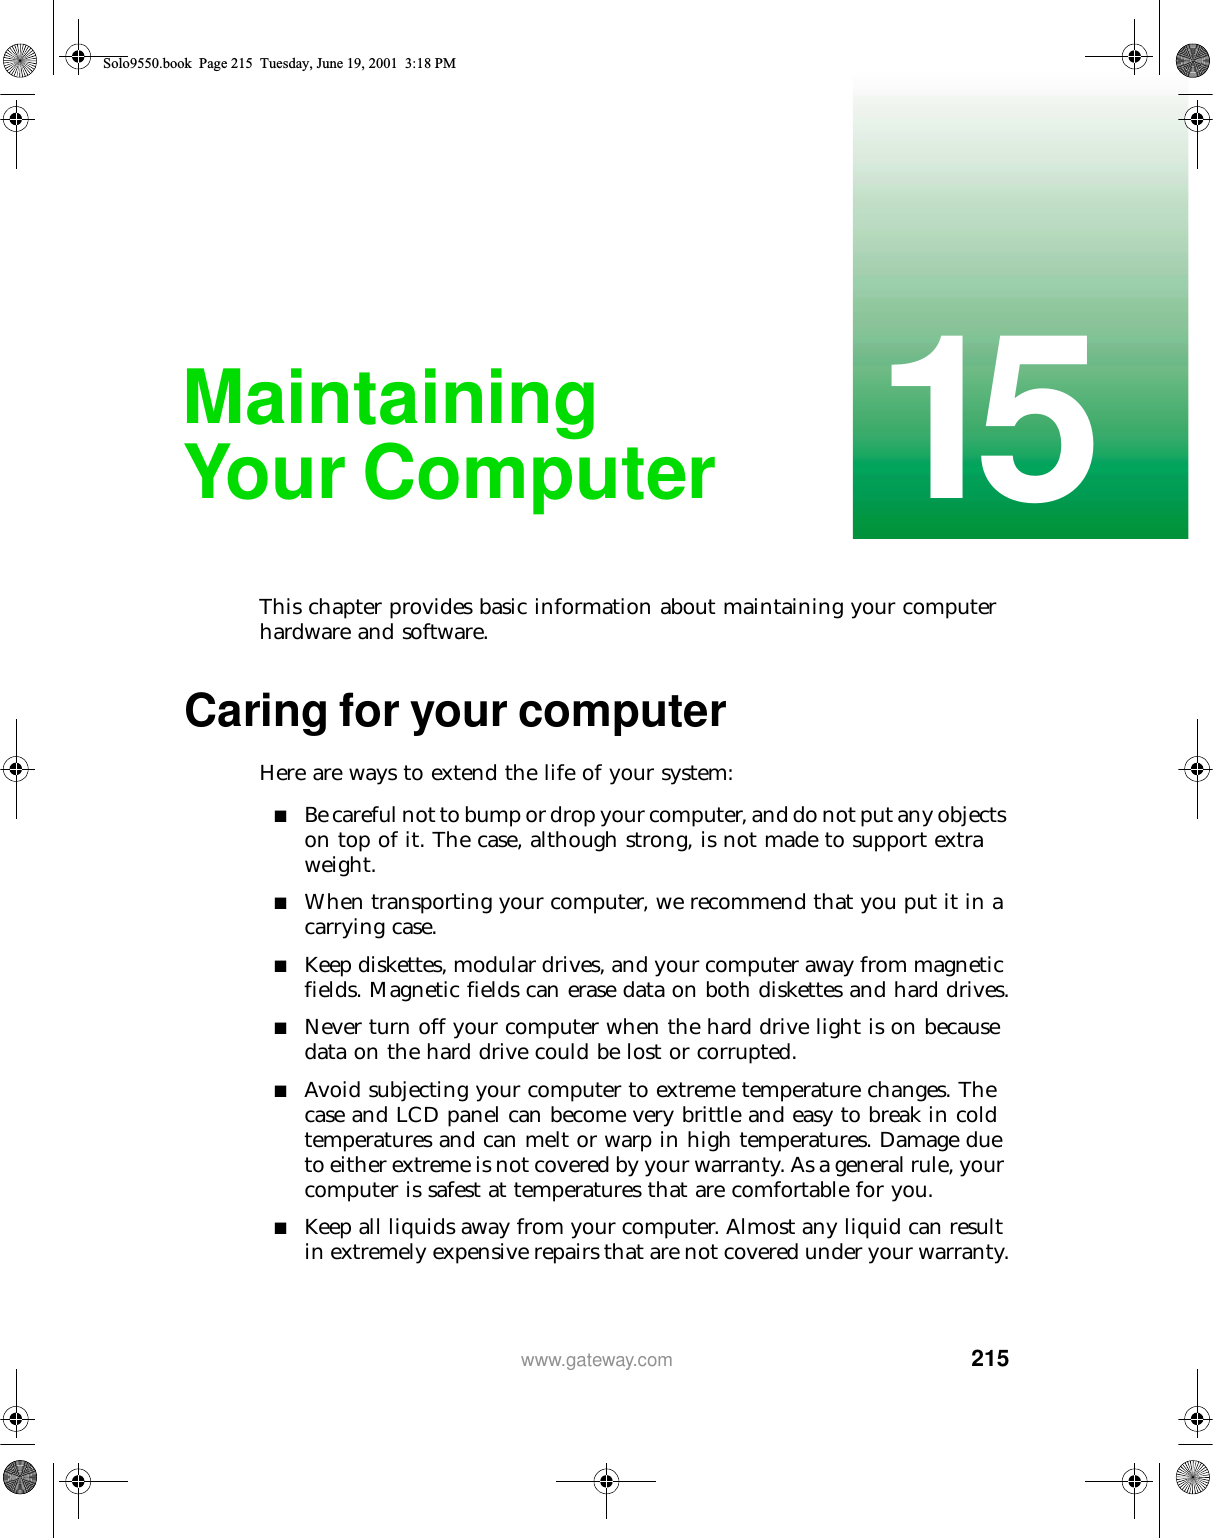 21515www.gateway.comMaintaining Your ComputerThis chapter provides basic information about maintaining your computer hardware and software.Caring for your computerHere are ways to extend the life of your system:■Be careful not to bump or drop your computer, and do not put any objects on top of it. The case, although strong, is not made to support extra weight.■When transporting your computer, we recommend that you put it in a carrying case.■Keep diskettes, modular drives, and your computer away from magnetic fields. Magnetic fields can erase data on both diskettes and hard drives.■Never turn off your computer when the hard drive light is on because data on the hard drive could be lost or corrupted.■Avoid subjecting your computer to extreme temperature changes. The case and LCD panel can become very brittle and easy to break in cold temperatures and can melt or warp in high temperatures. Damage due to either extreme is not covered by your warranty. As a general rule, your computer is safest at temperatures that are comfortable for you.■Keep all liquids away from your computer. Almost any liquid can result in extremely expensive repairs that are not covered under your warranty.Solo9550.book Page 215 Tuesday, June 19, 2001 3:18 PM